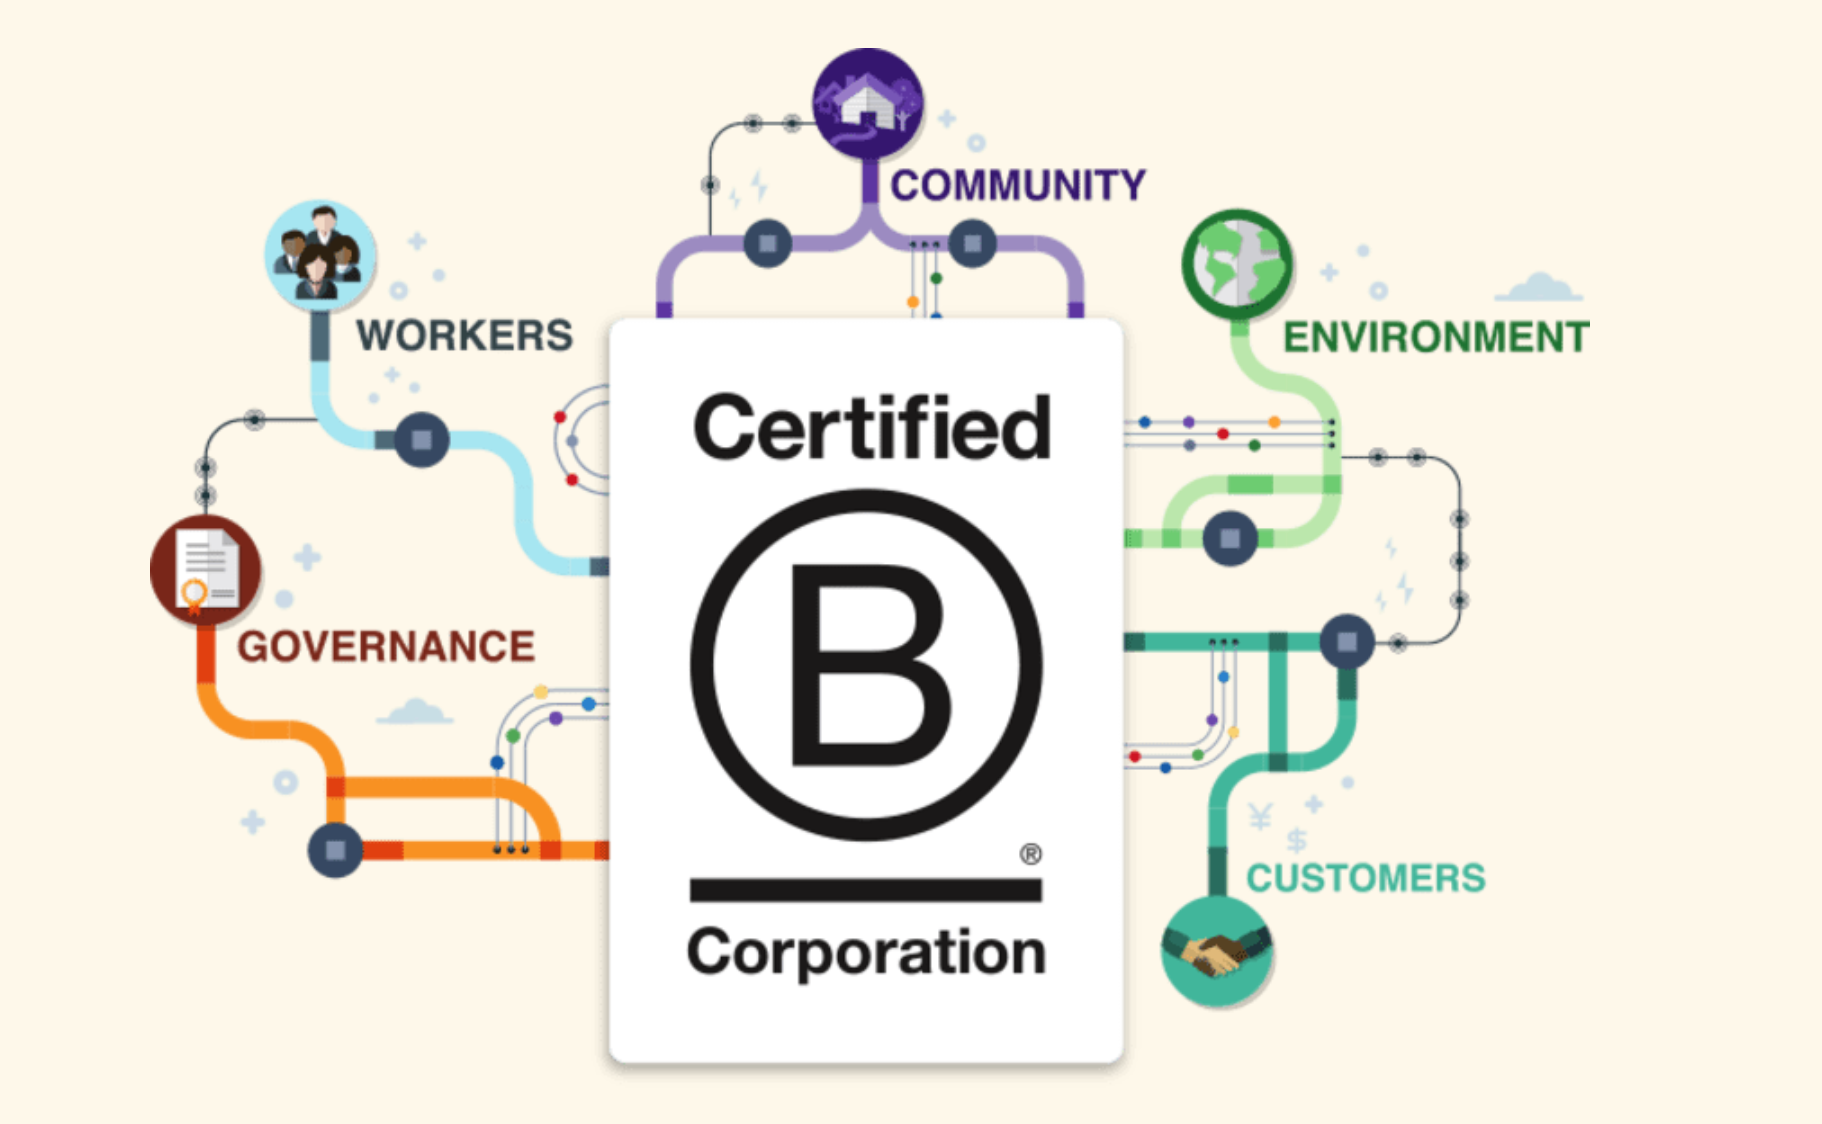 B Corps: bringing sustainable business ethics into governance